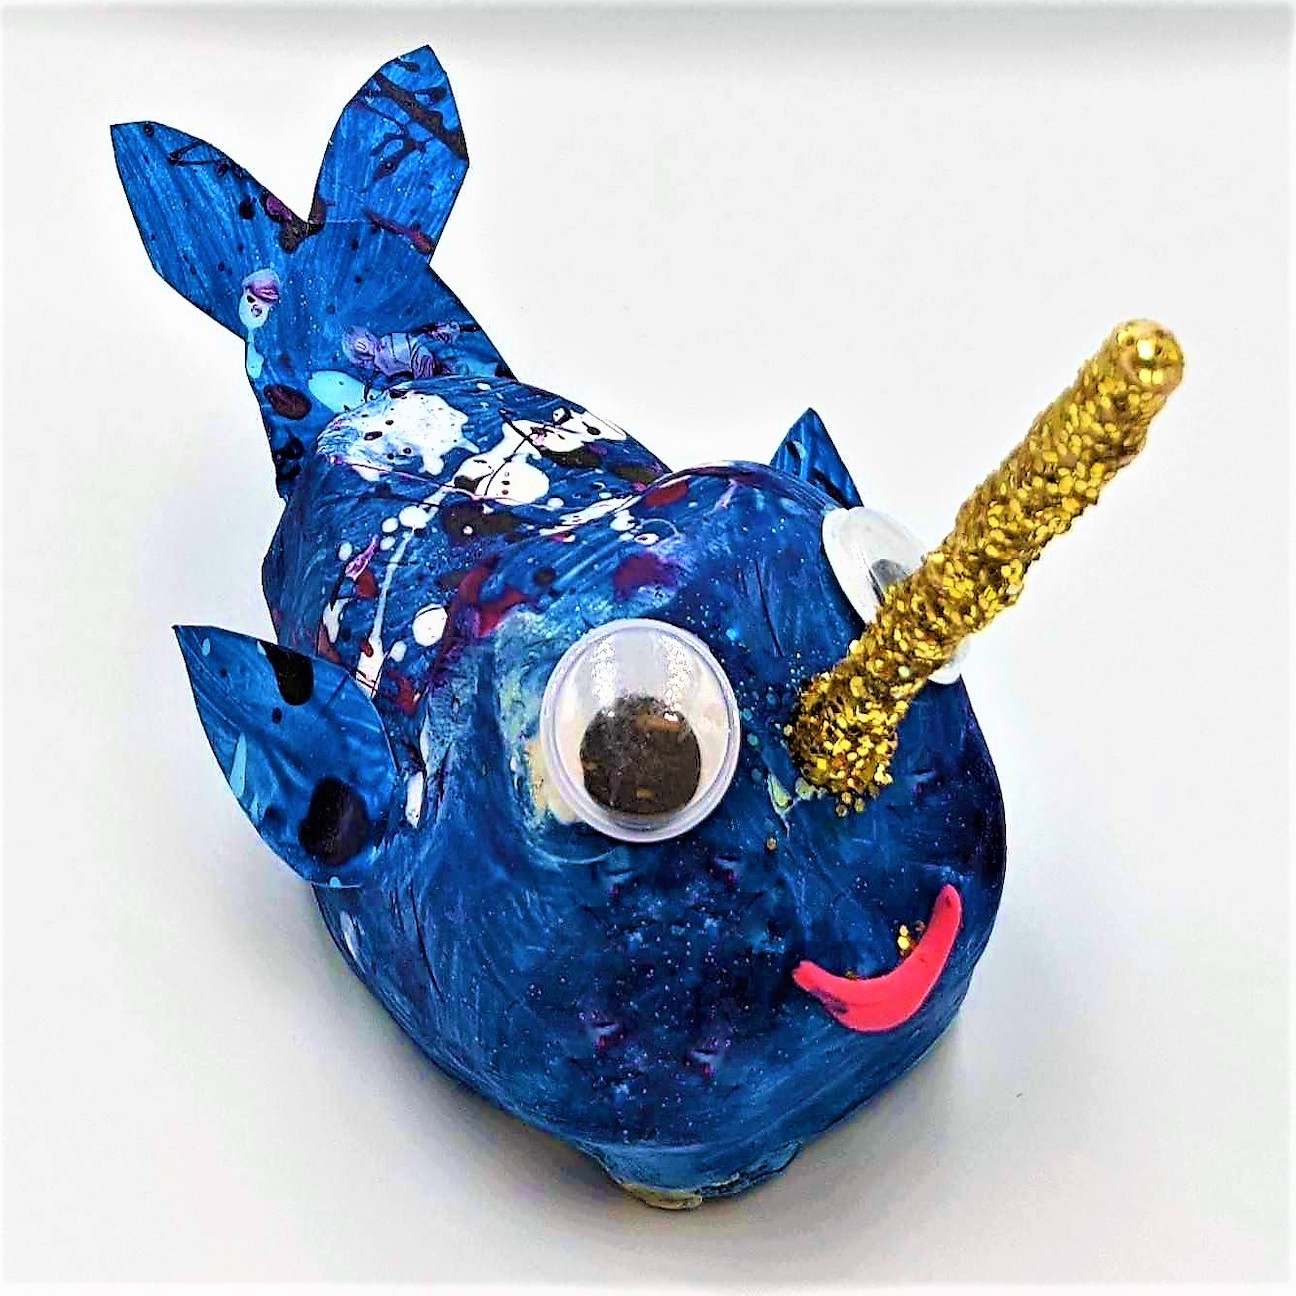 Kidcreate Studio - Bloomfield, Nifty Narwhal Art Project